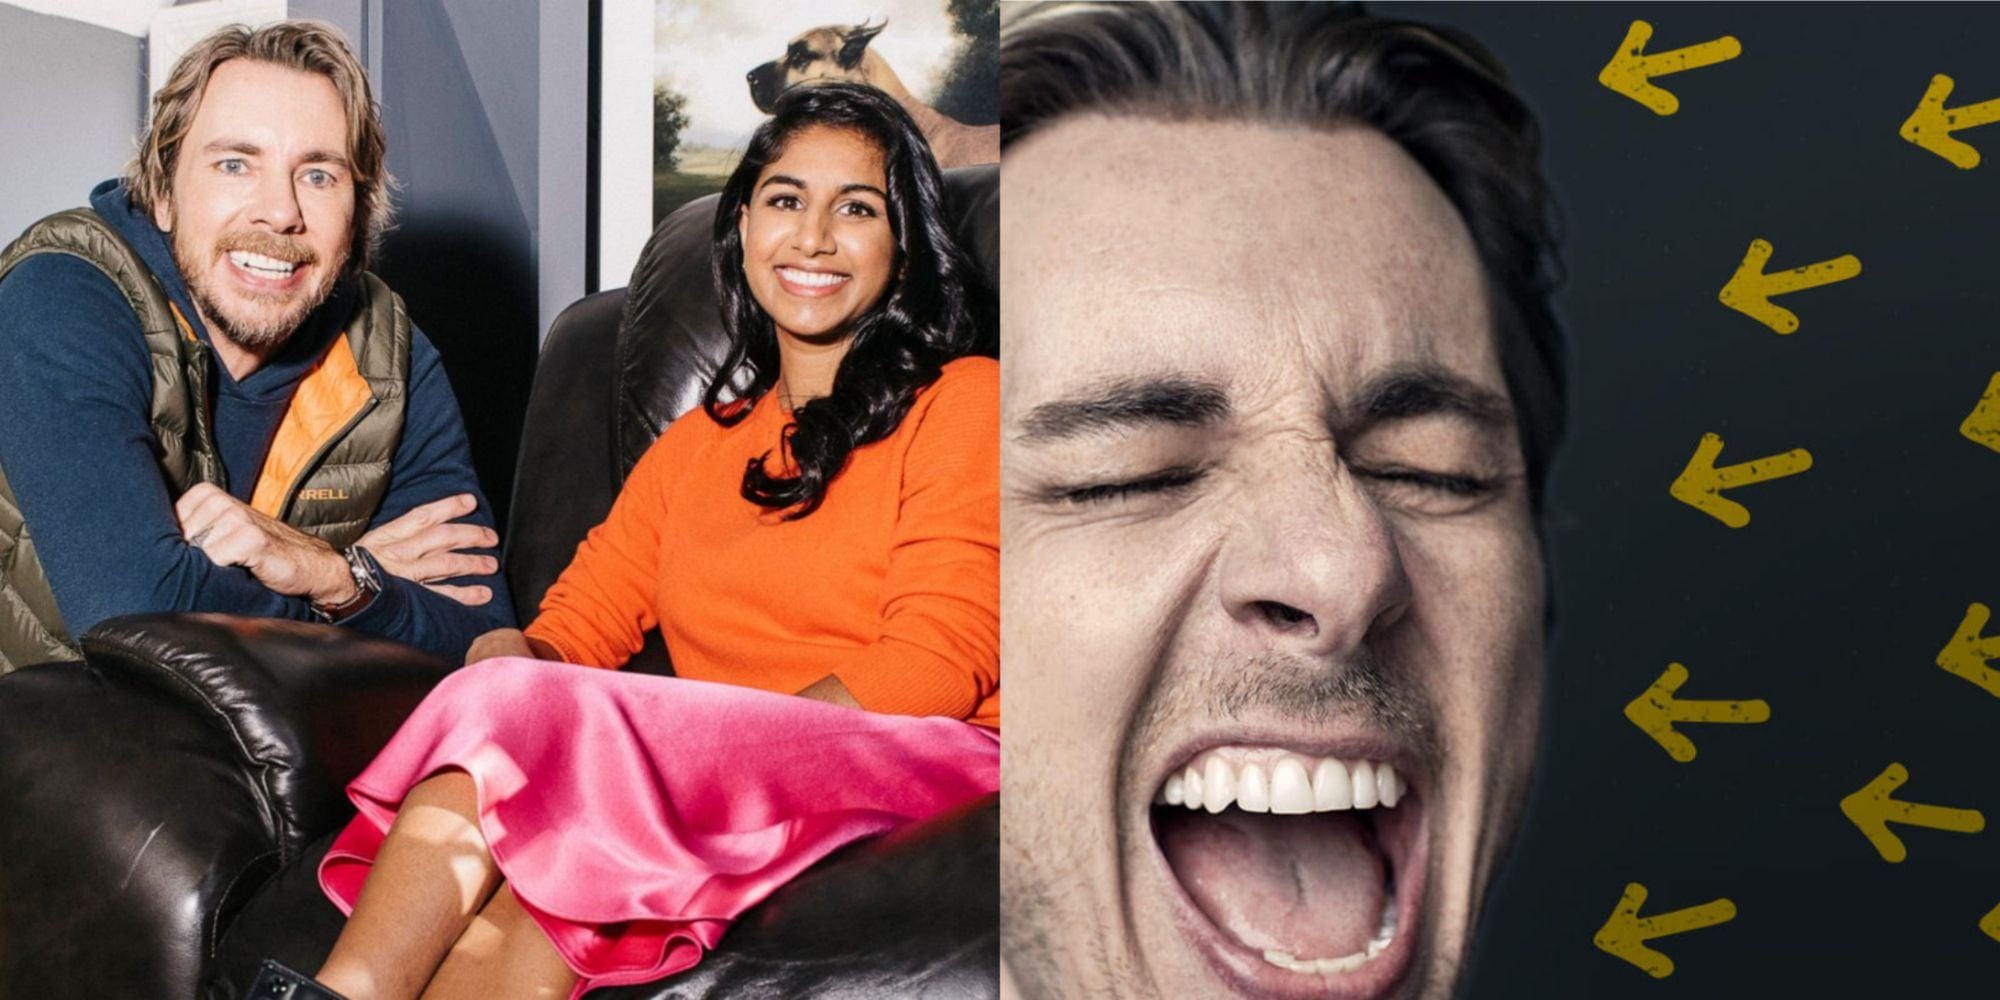 Two side by side images from Dax Shepard's Armchair Expert podcast